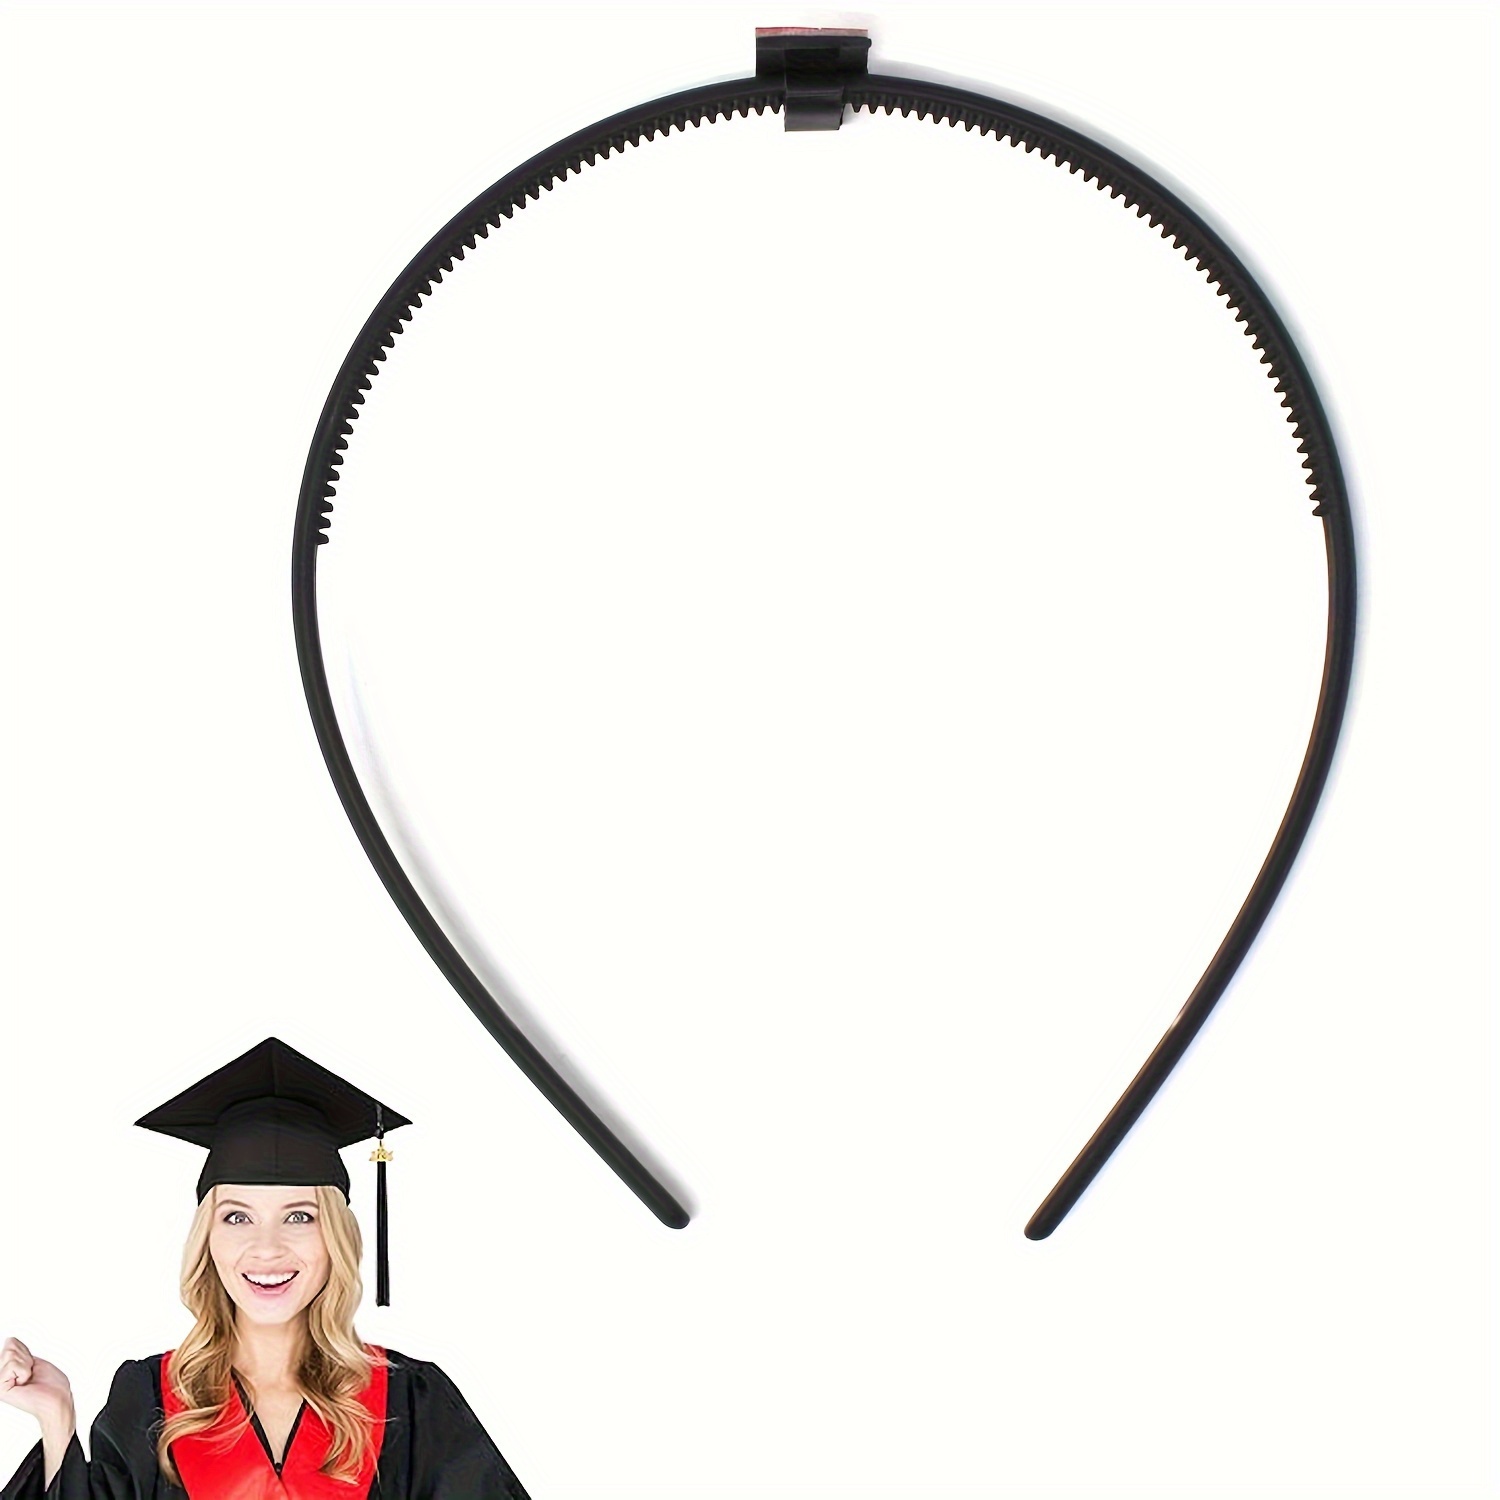 

1pc Graduation Cap Holder Headband, Firm Grip Hairband For Secure Graduation Hat Fit, Universally Sized For All Hair Types, Essential Graduate Accessory